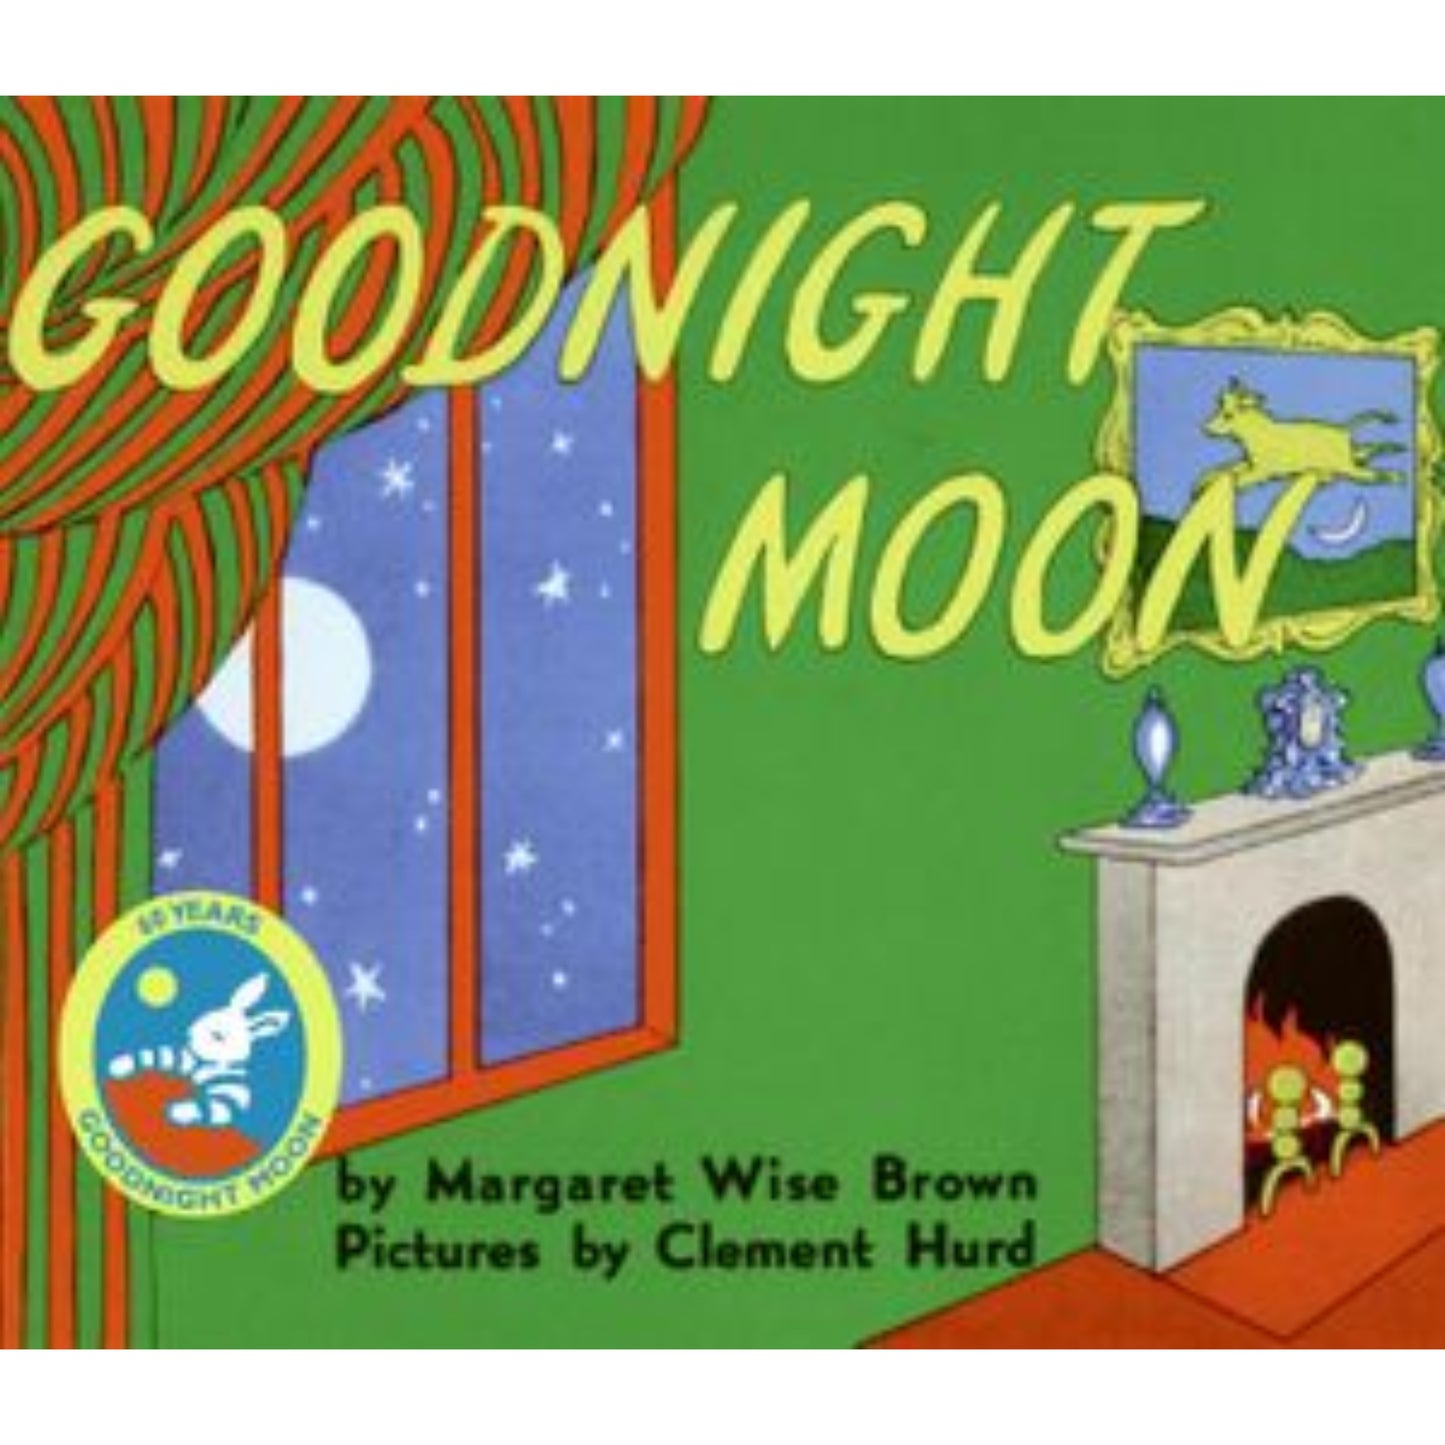 Goodnight Moon Board Book - Margaret Wise Brown